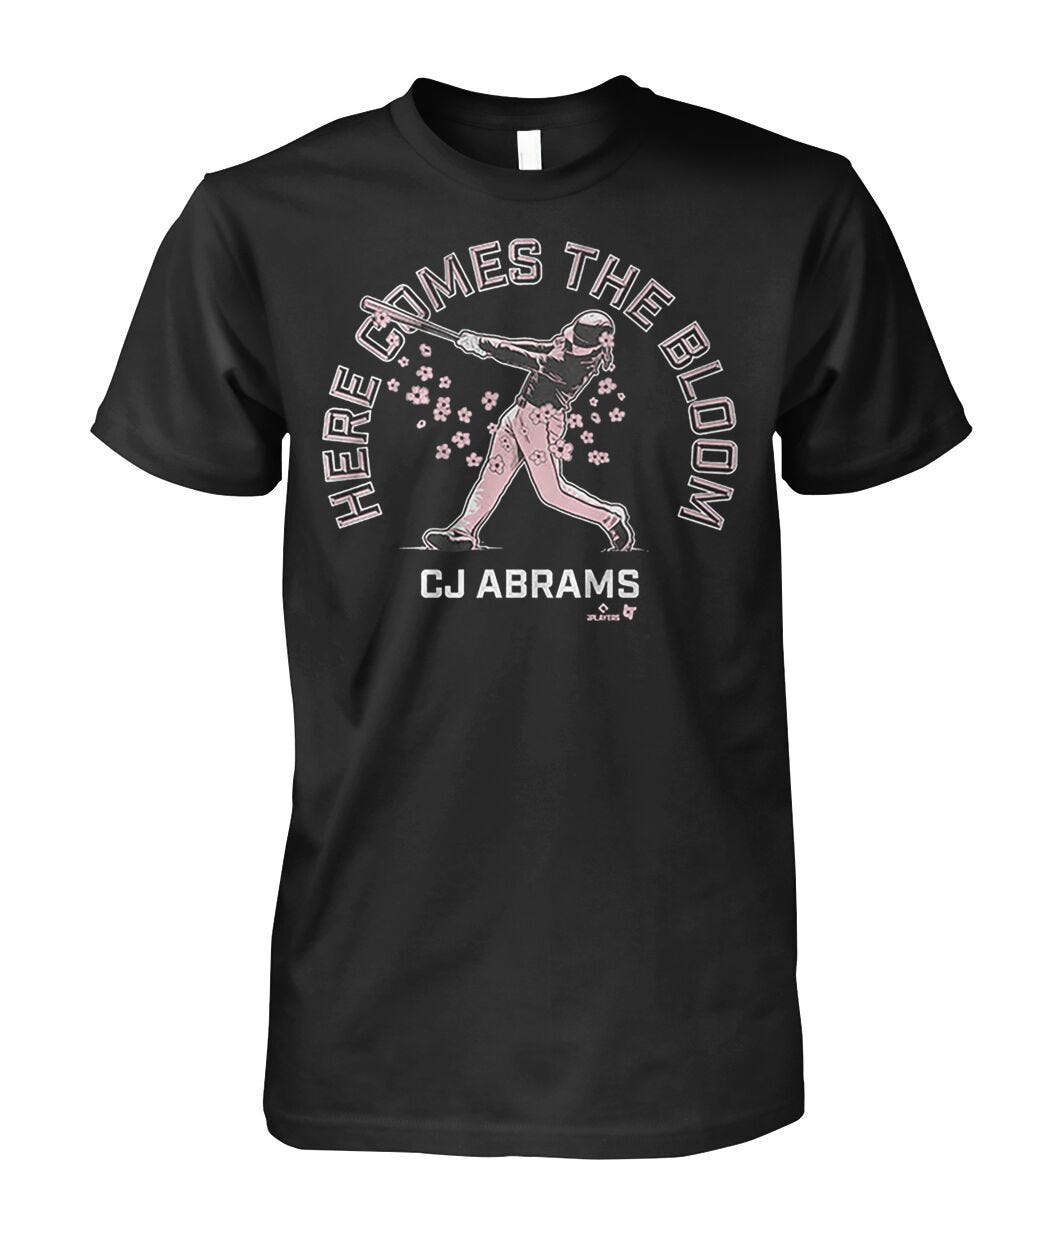 CJ Abrams Here Comes The Bloom Shirt